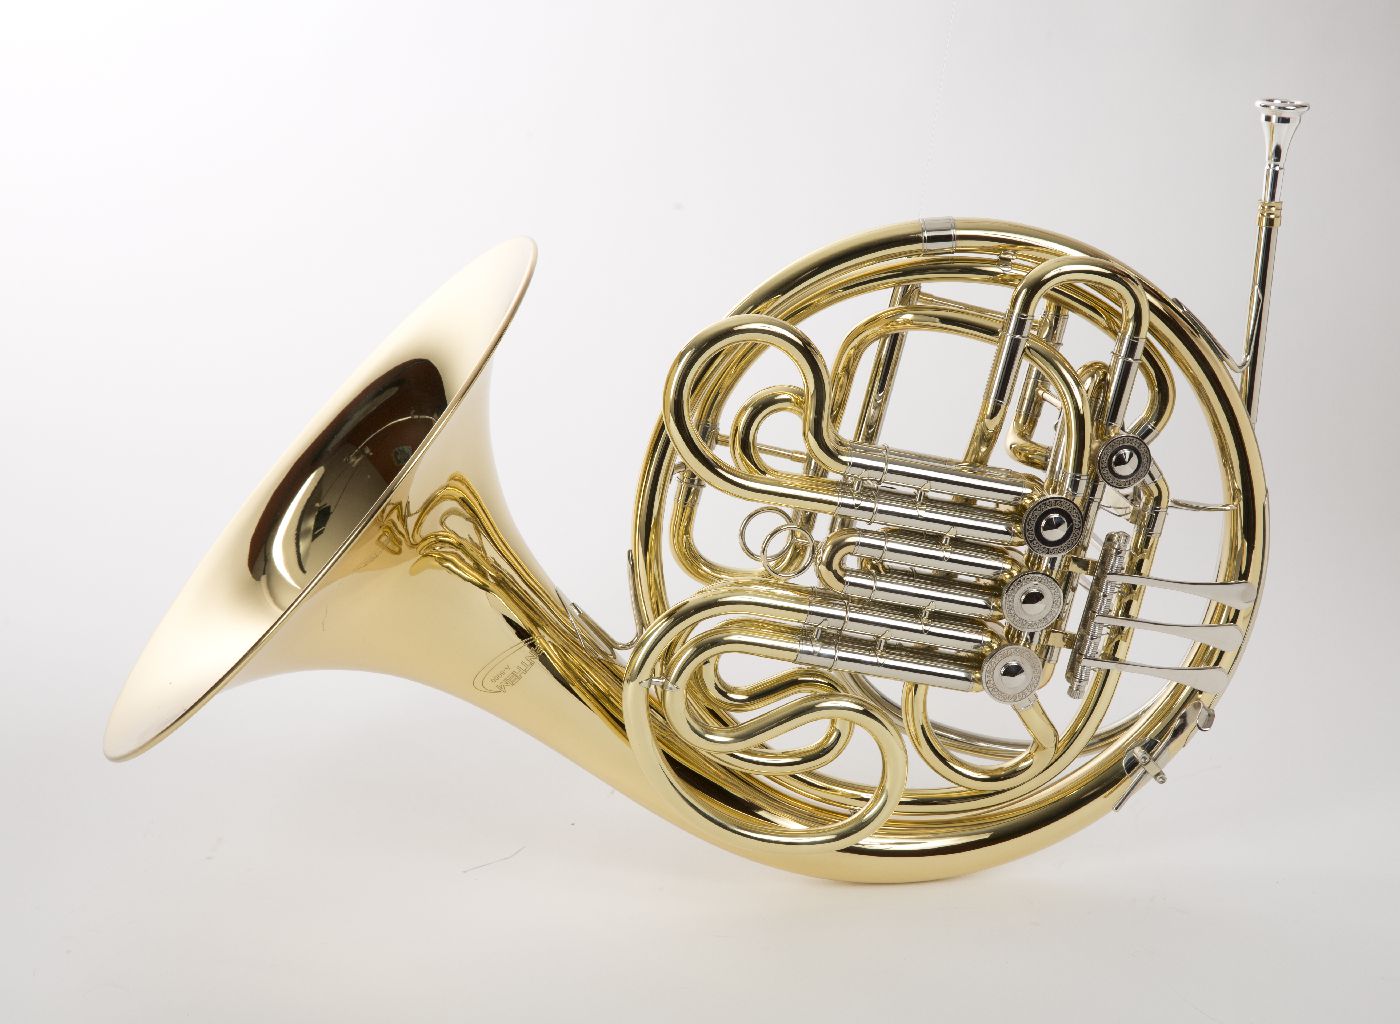 ANTHEM A-5000 FRENCH HORN